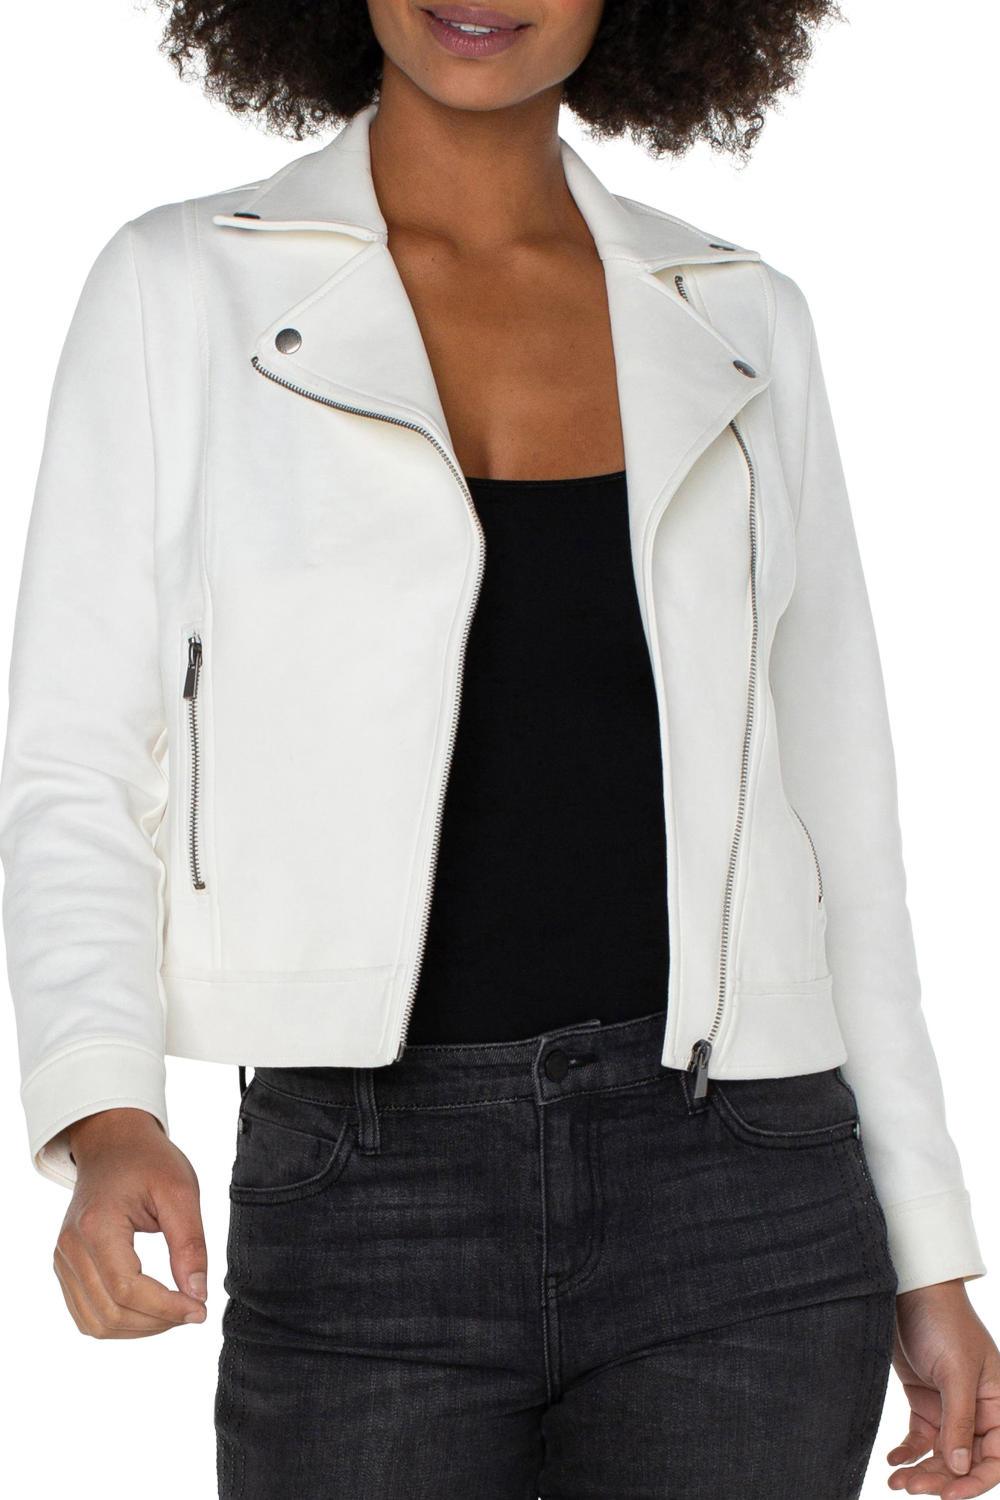 Liverpool White Frost Moto Jacket - Strawberry Moon Boutique